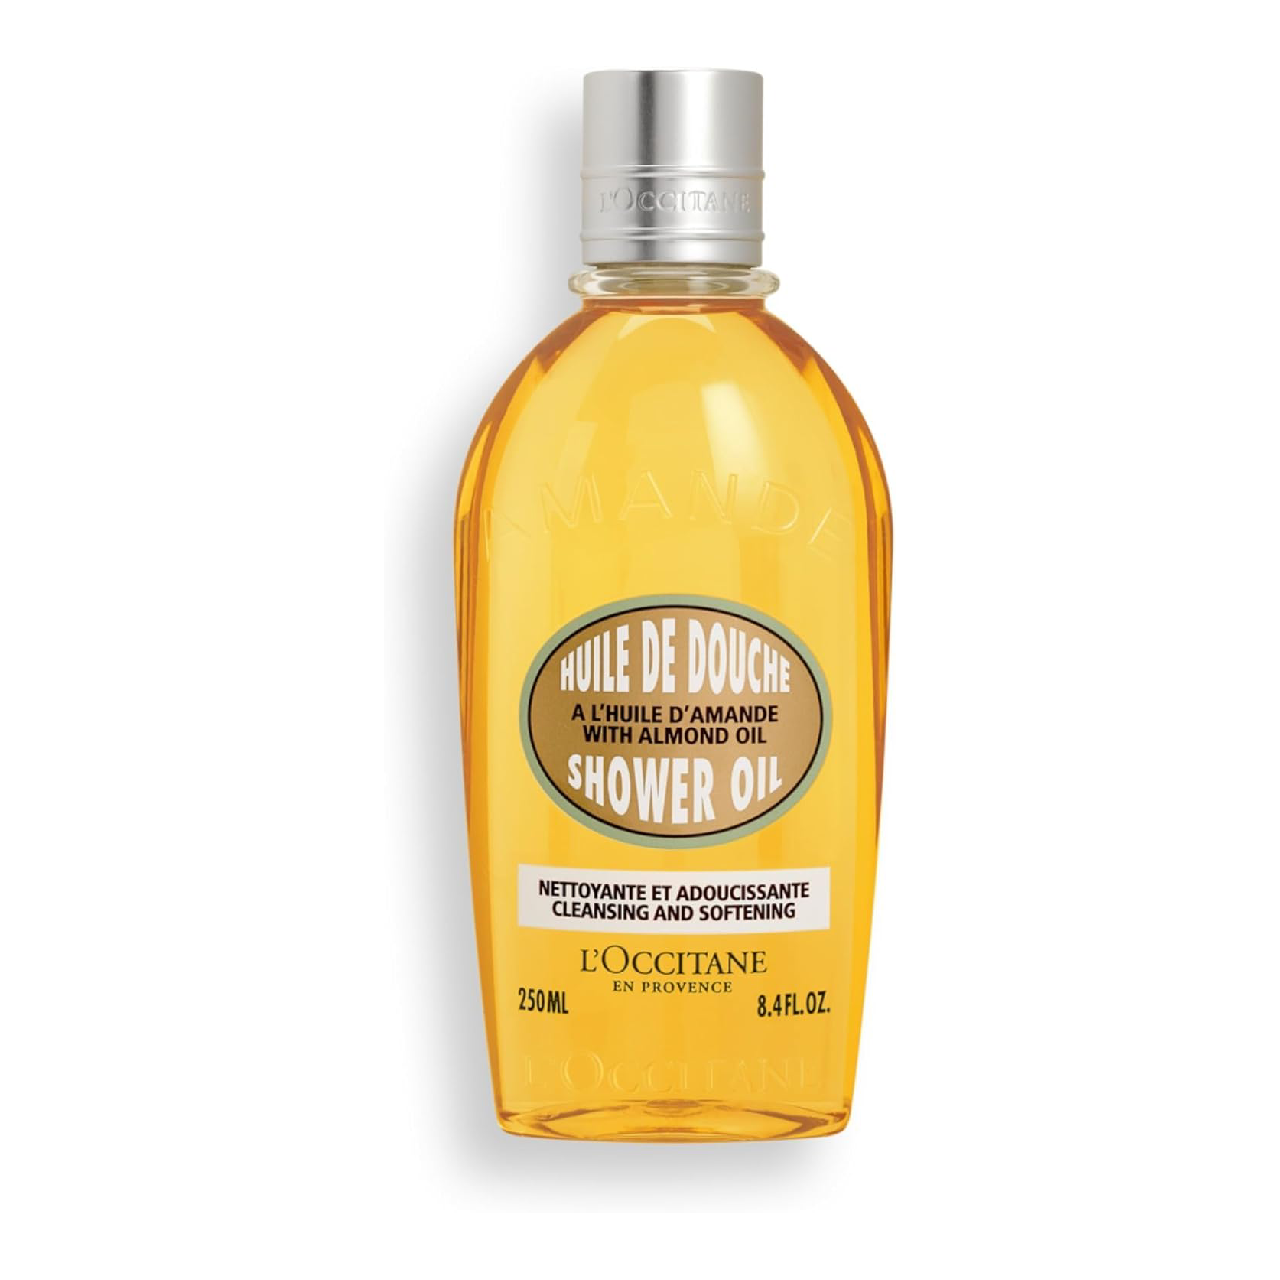 A bottle of L'Occitane Almond Shower Oil with almond flowers and almonds around it.